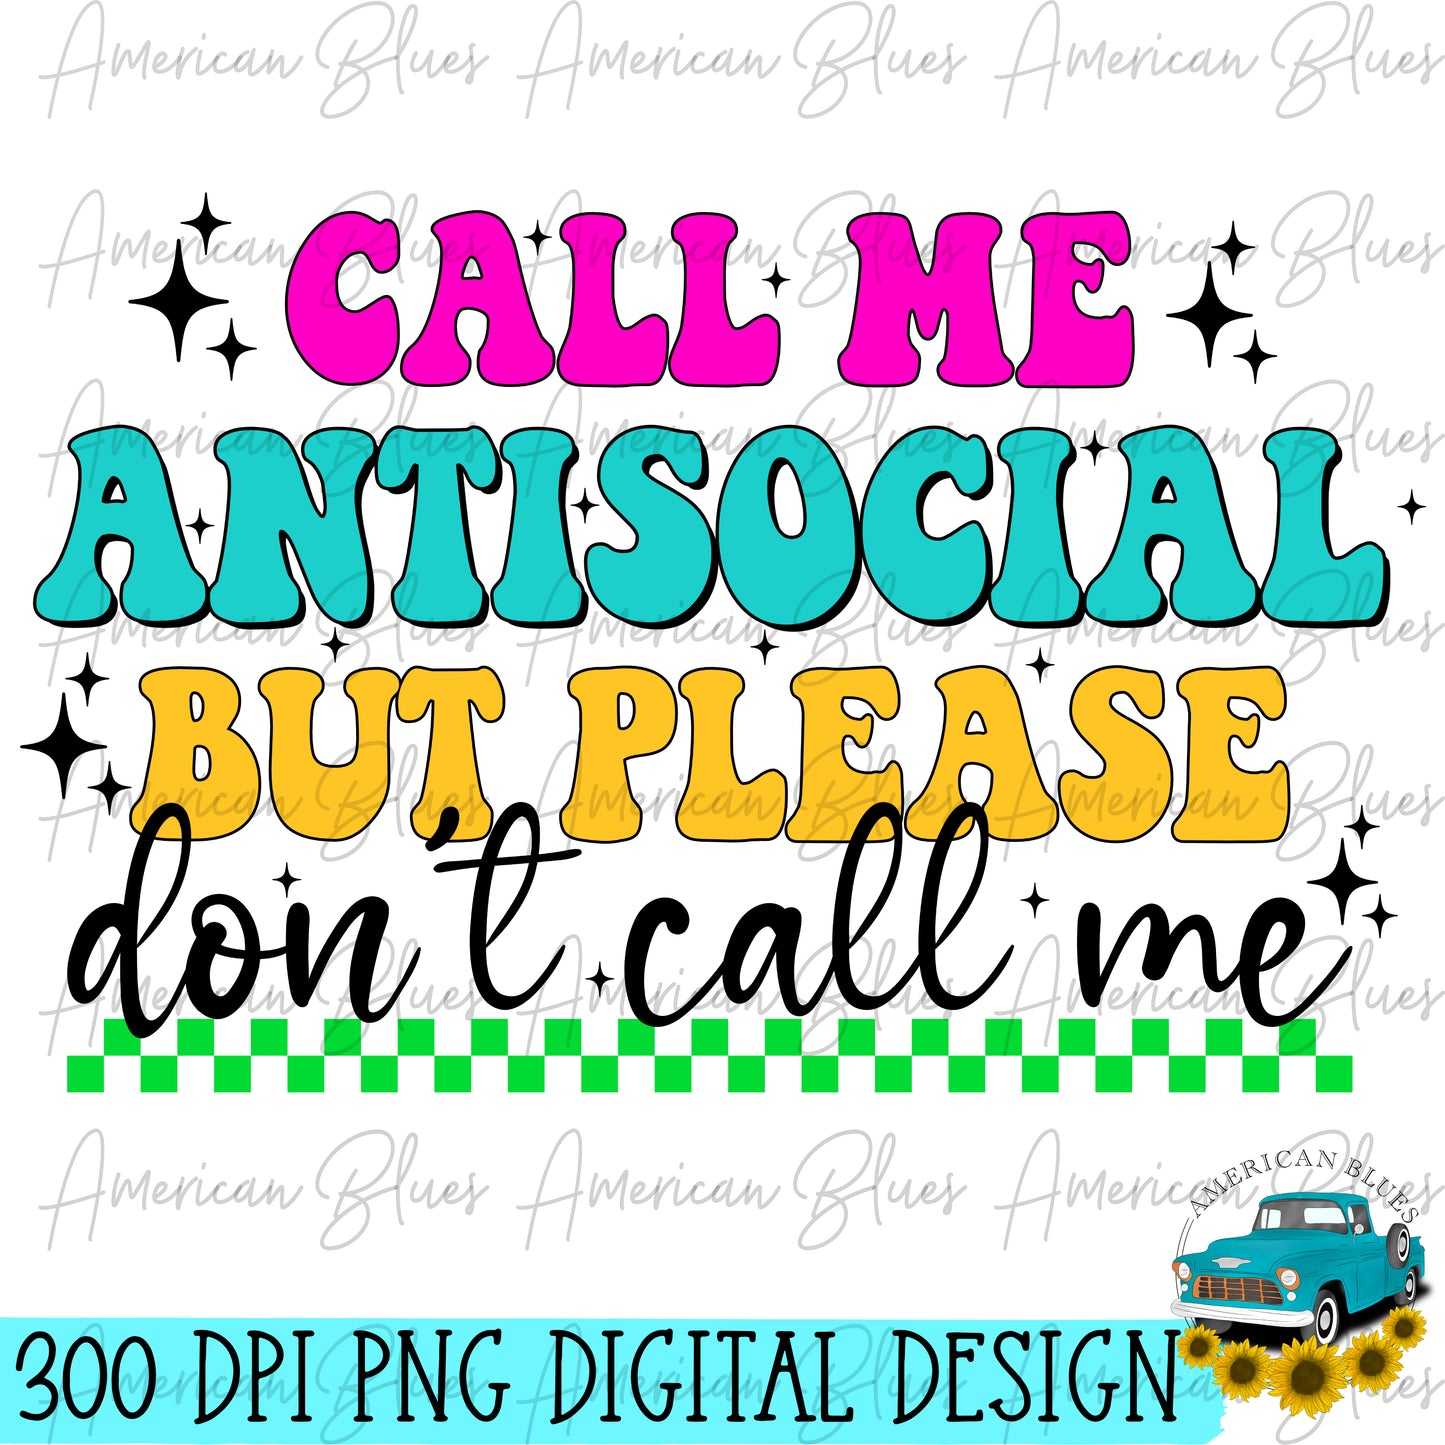 Call me antisocial but please don't call me